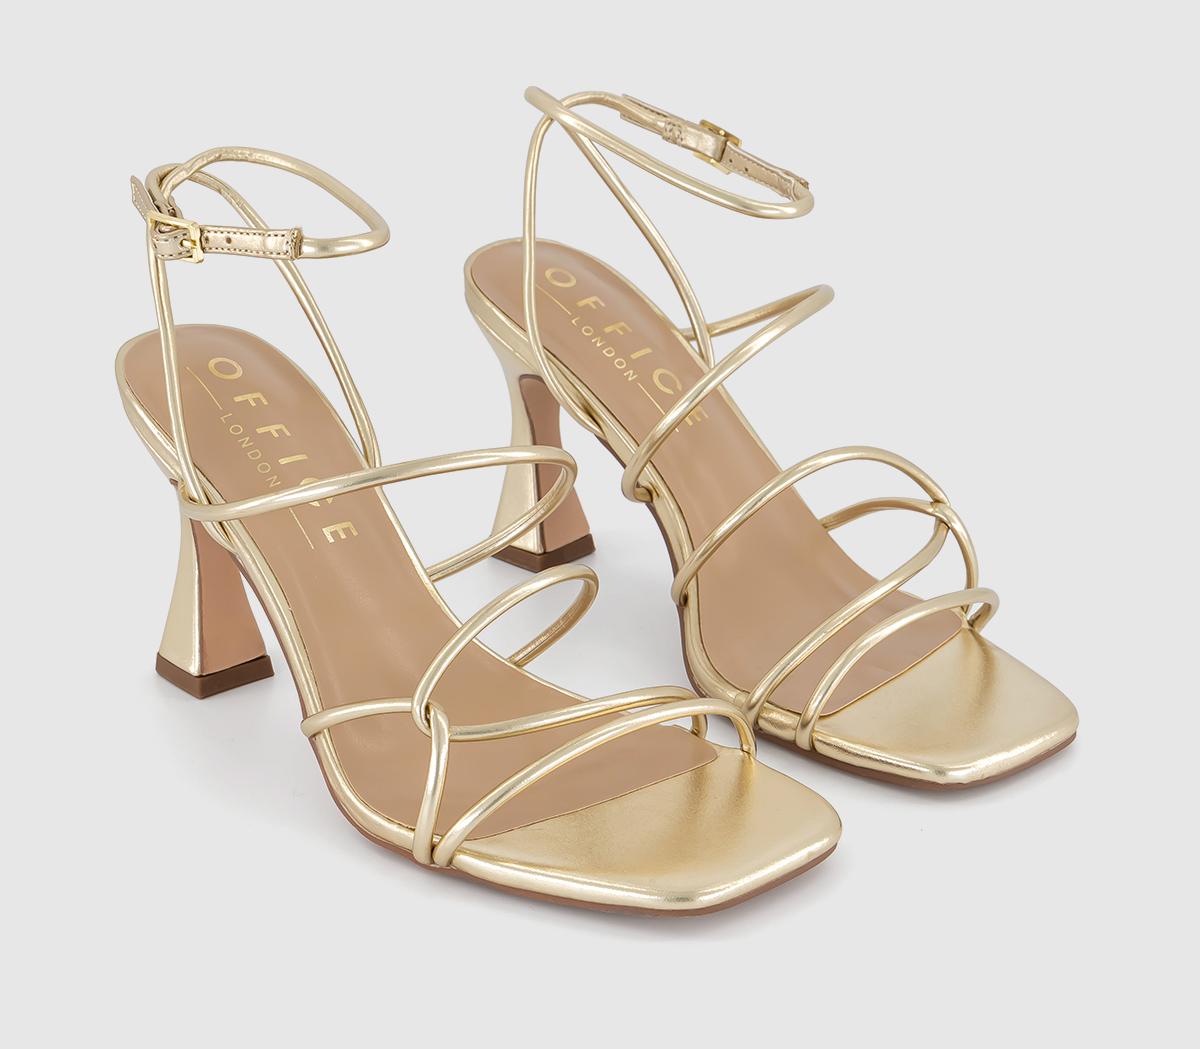 OFFICE Womens Million Dollar Strappy Sandals Gold, 3